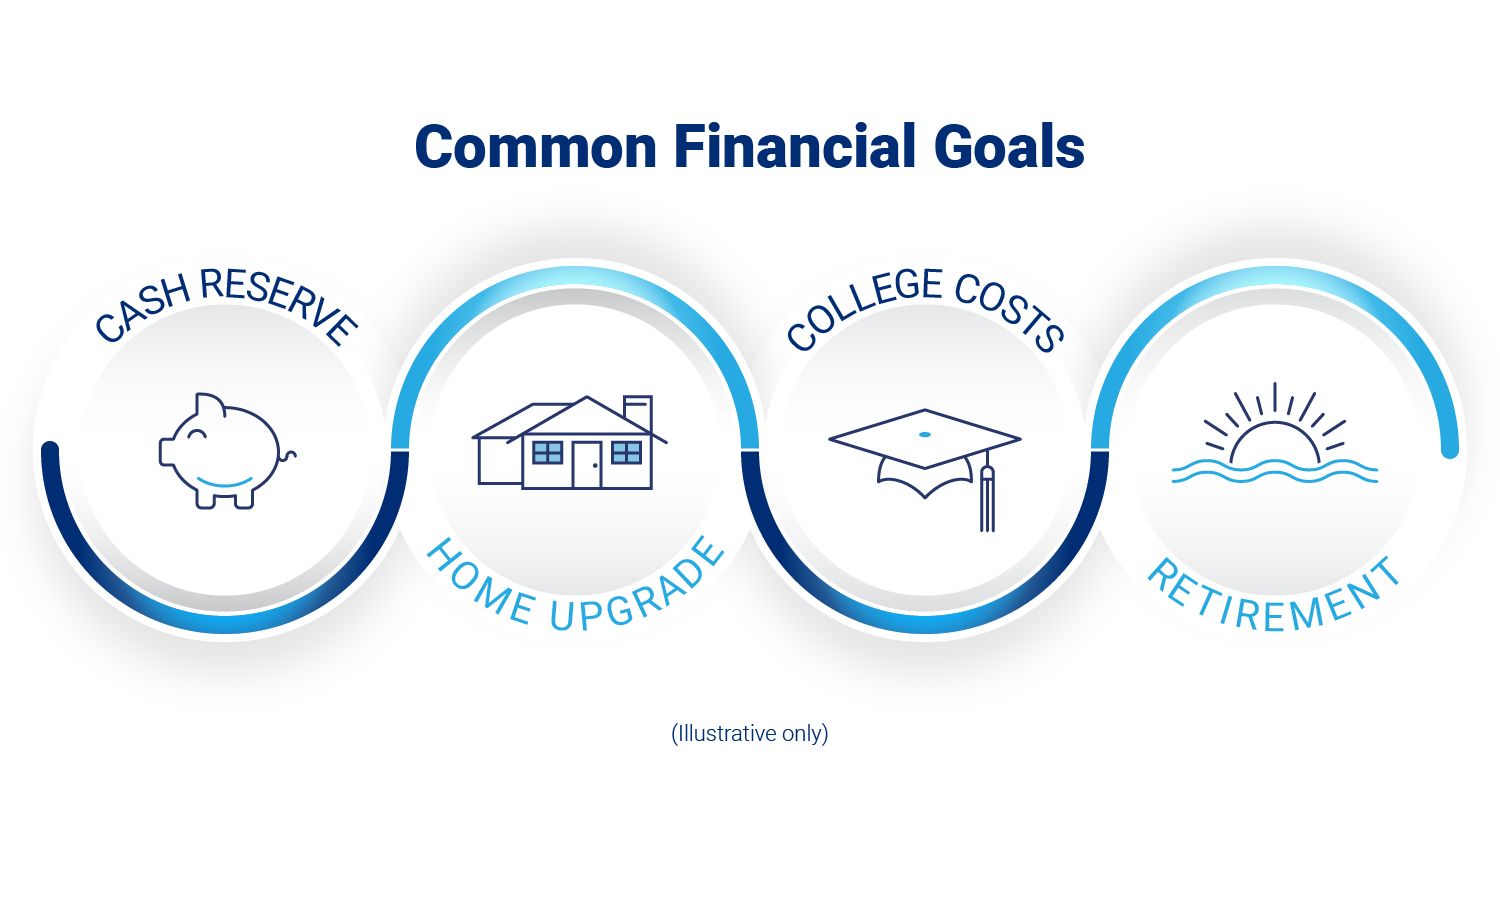 Common Financial Goals: Cash Reserve, Home Upgrade, College Costs, Retirement